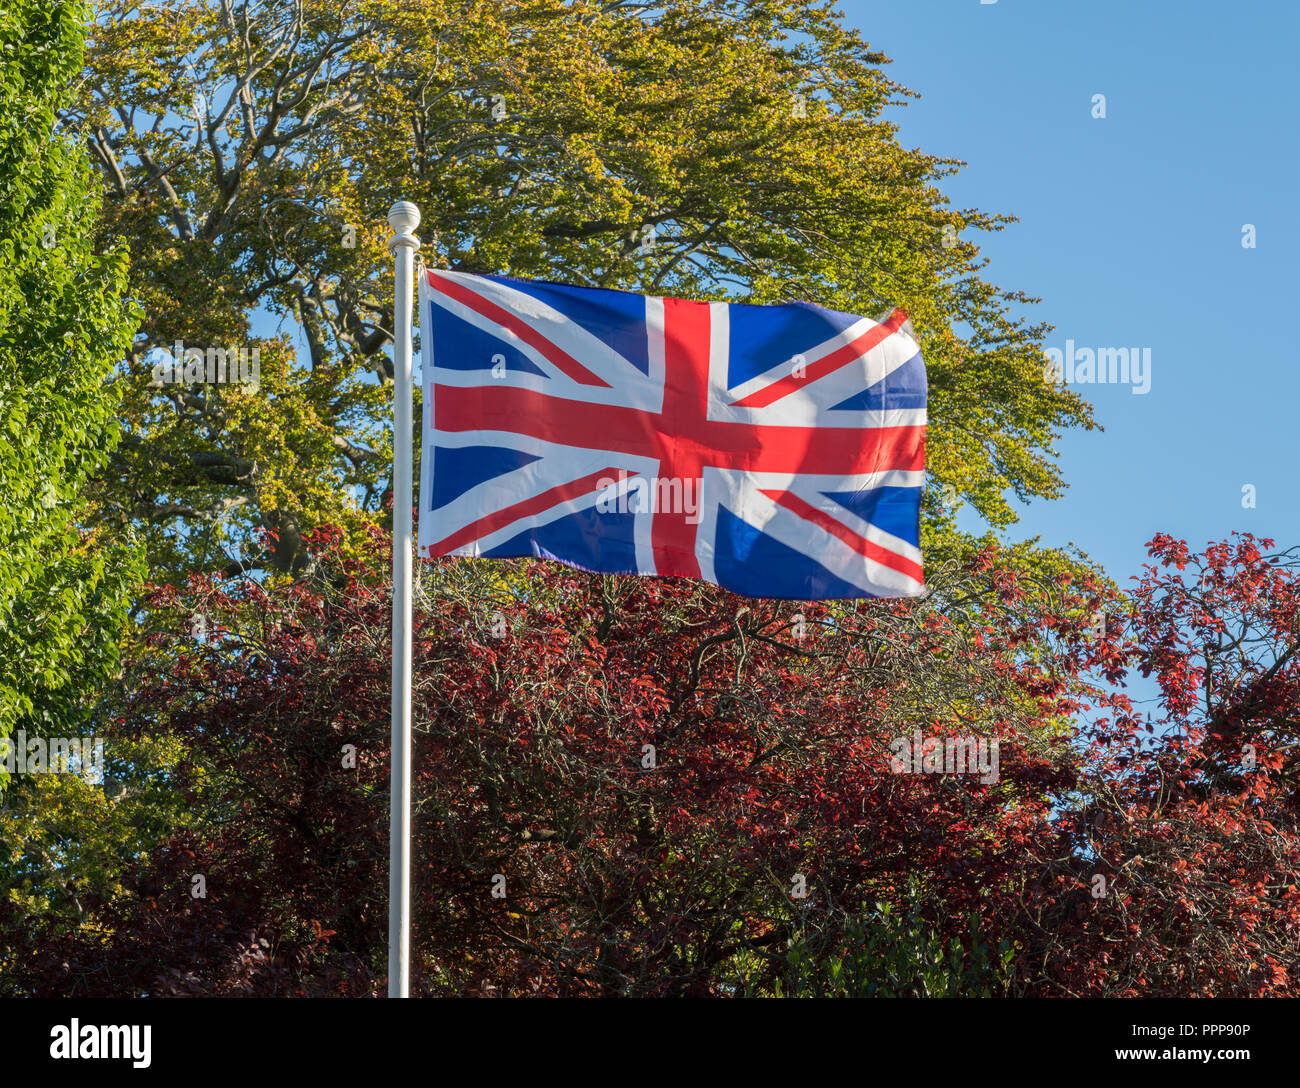 Union Jack or Union Flag flying in strong wind Stock Photo